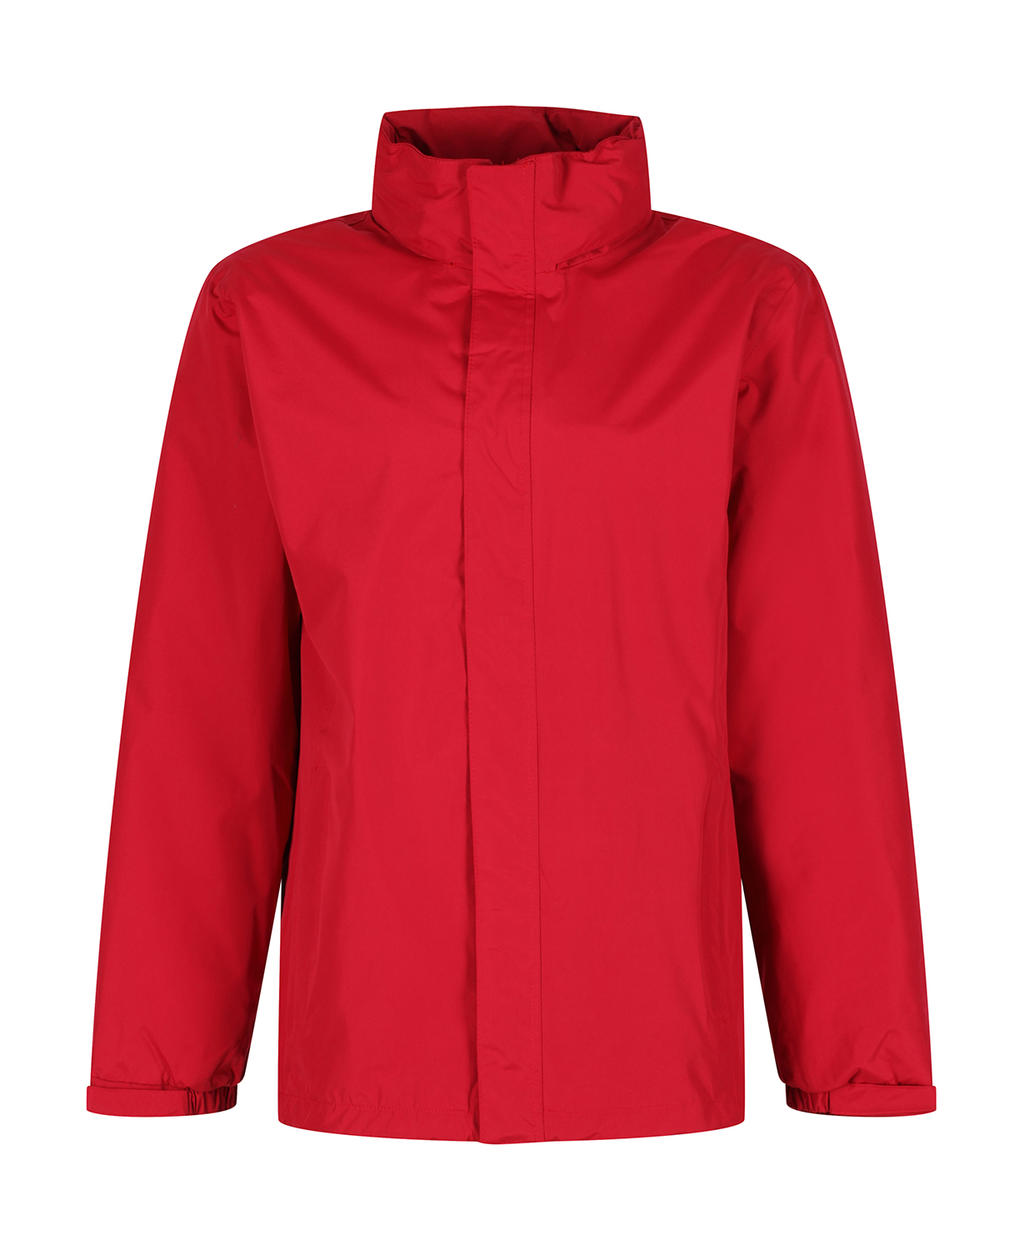  Ardmore Jacket in Farbe Classic Red